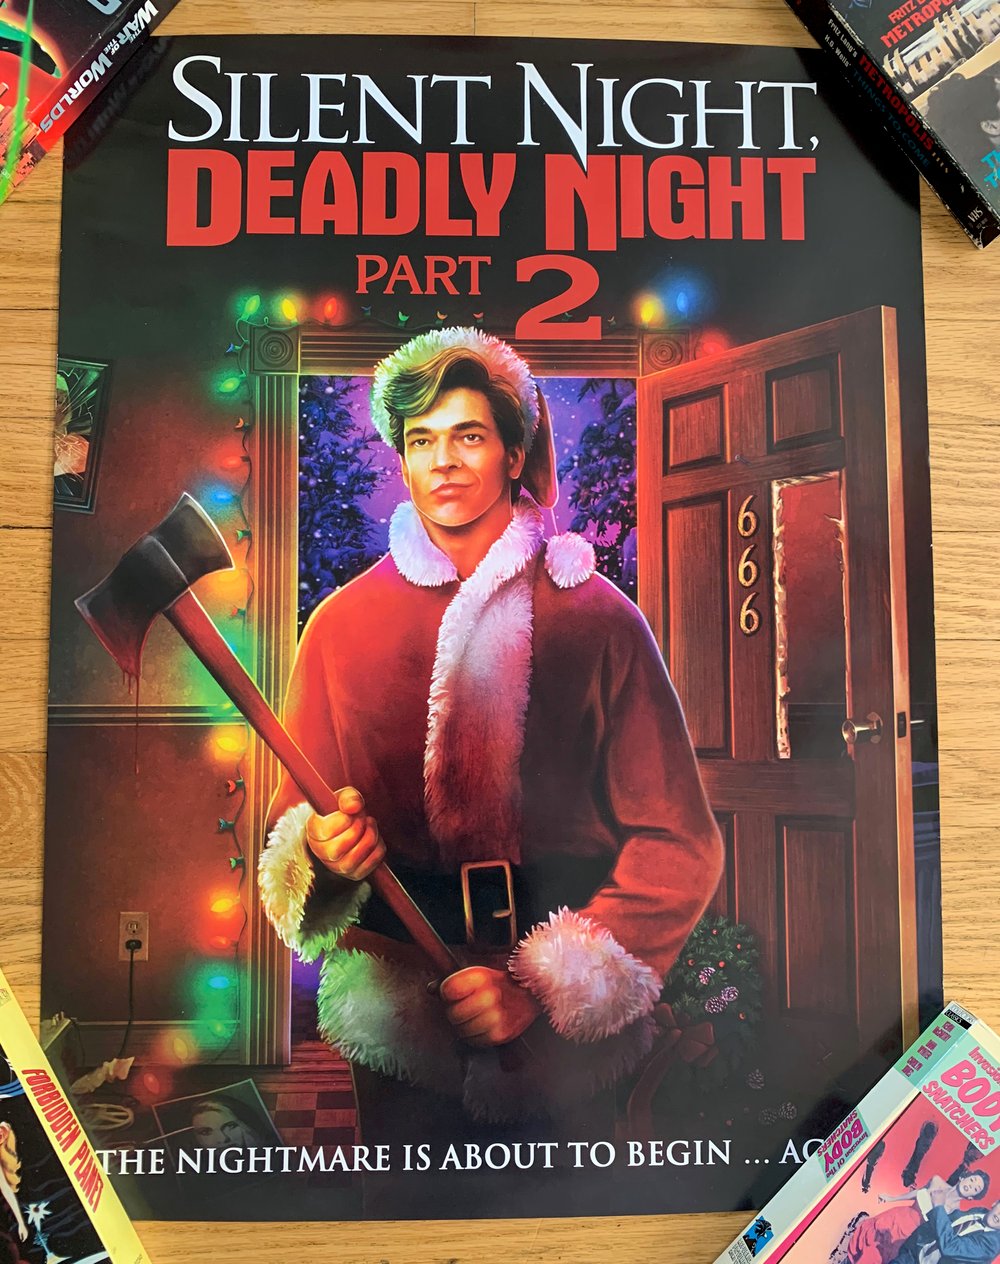 SILENT NIGHT DEADLY NIGHT PART 2 Limited Edition Scream Factory Lithograph Poster